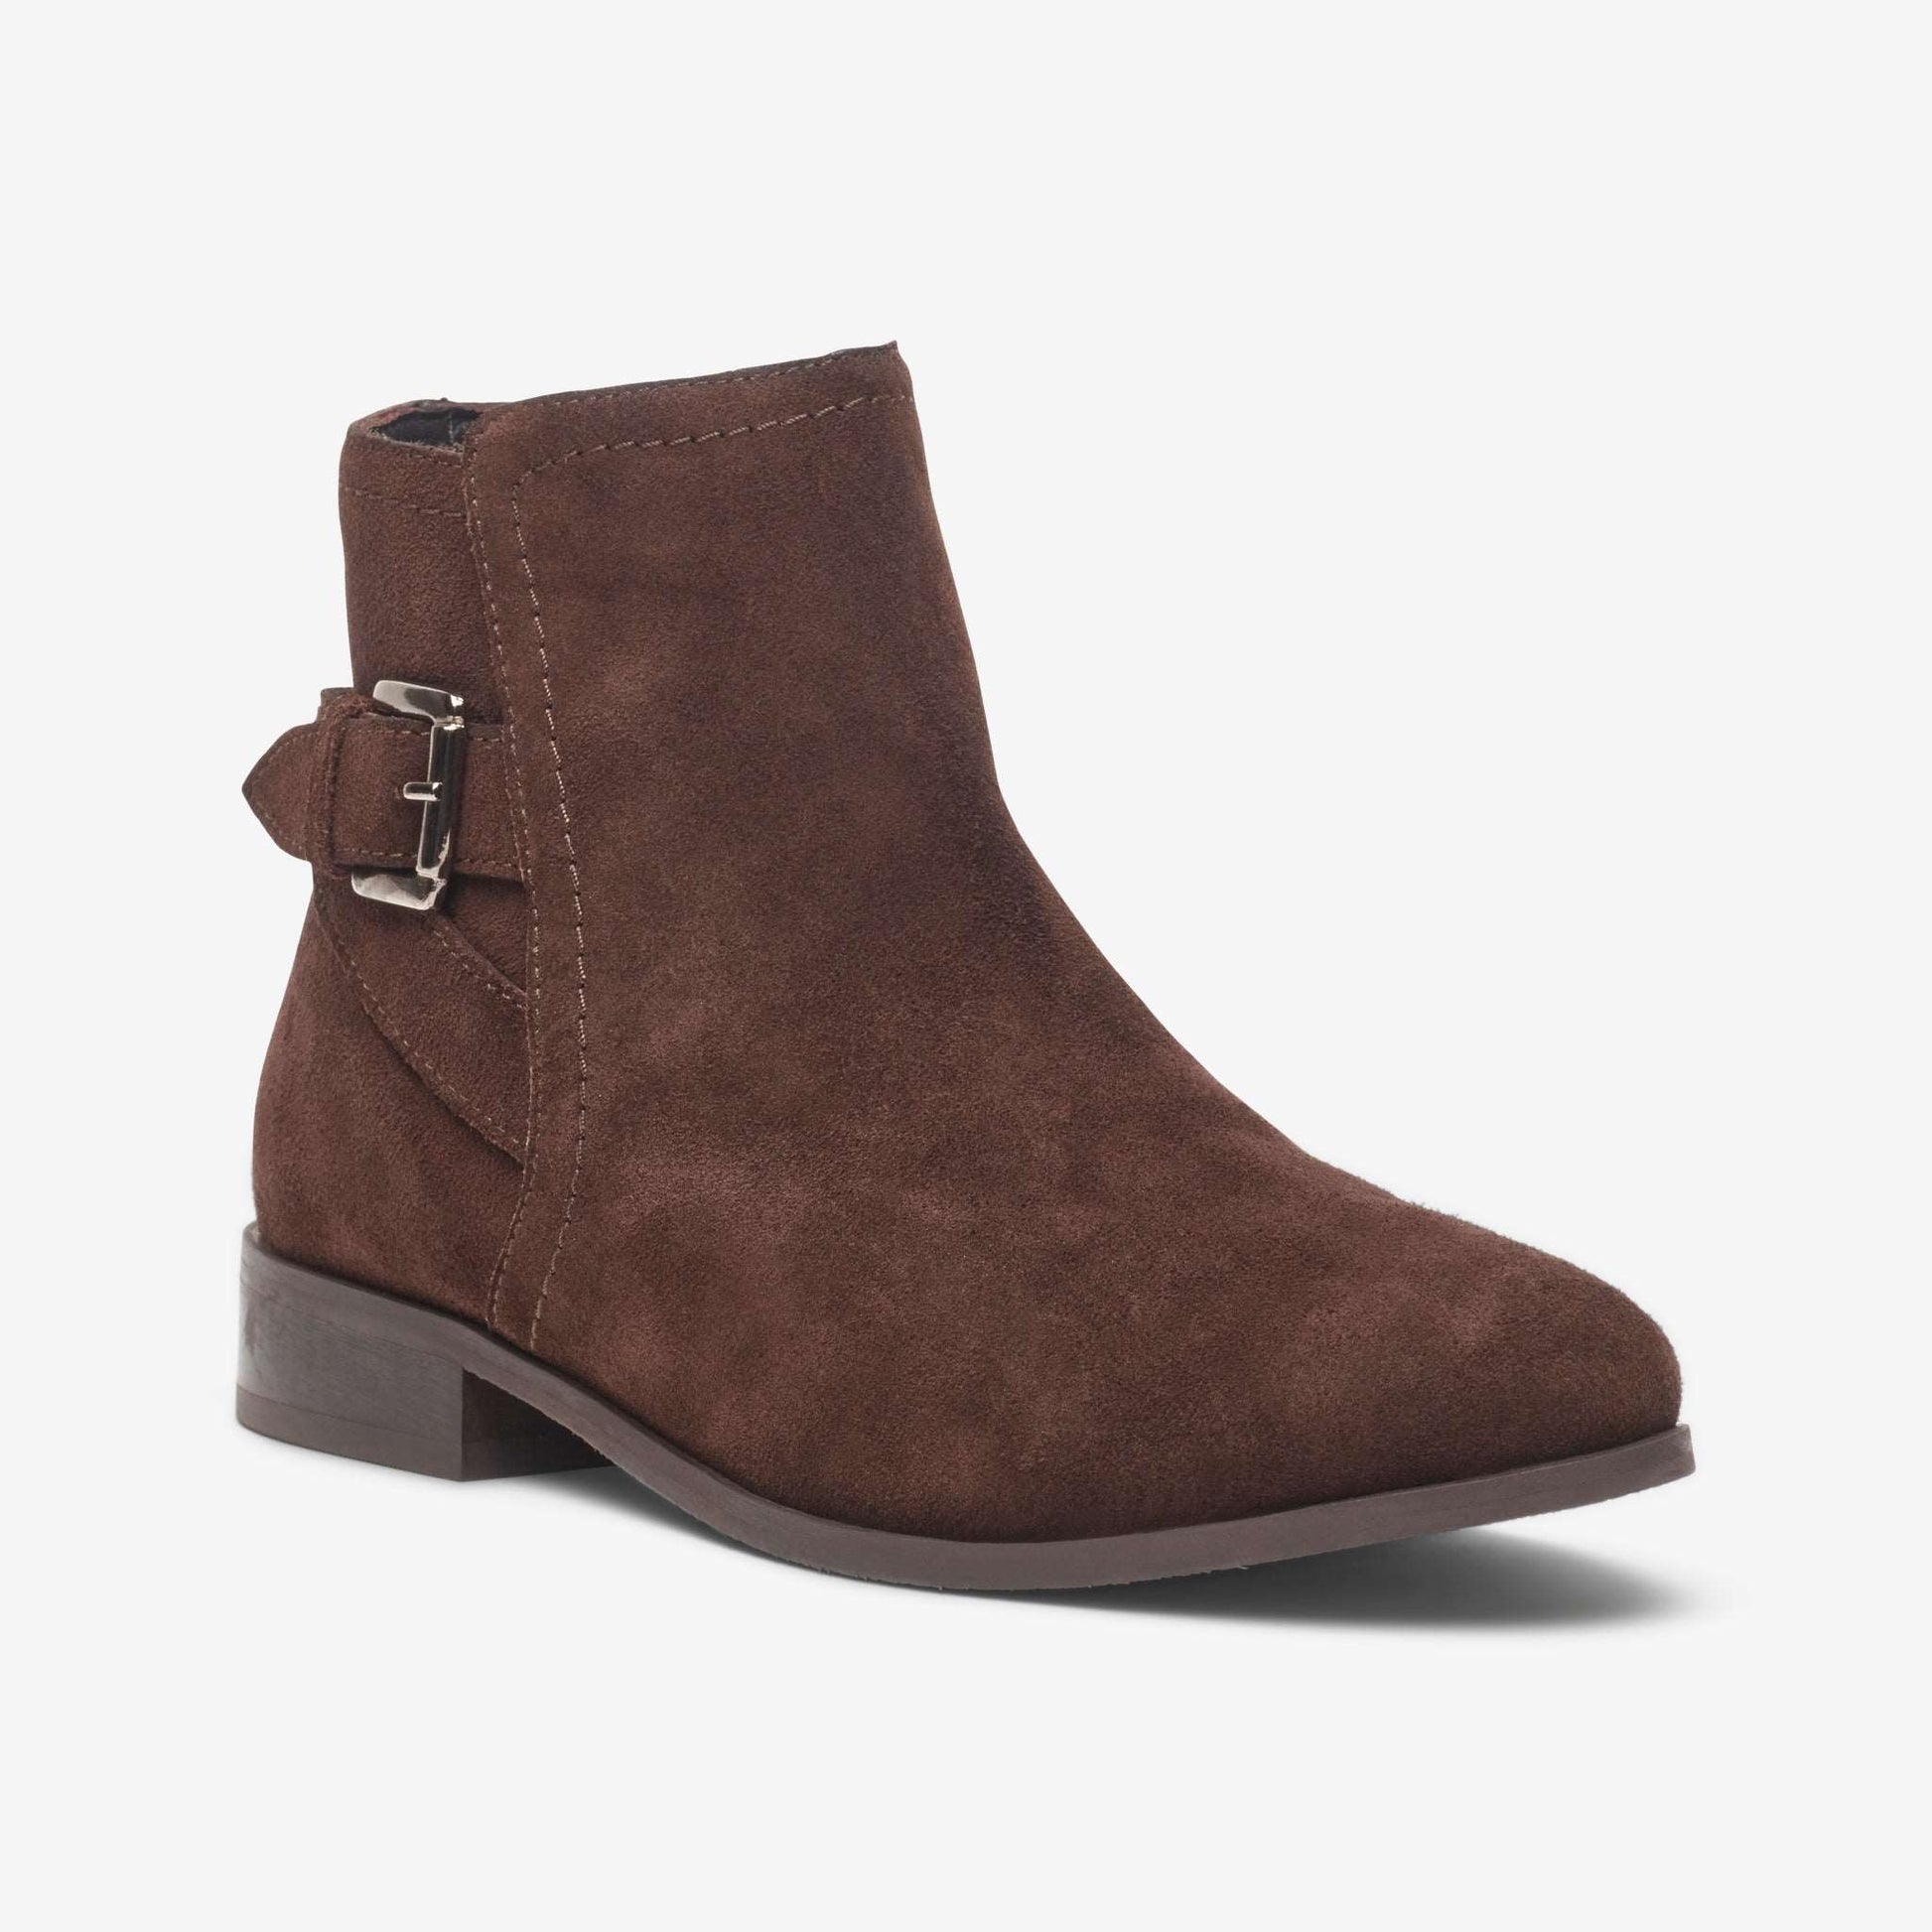 Wide fit brown suede ankle boot with strap and buckle detail